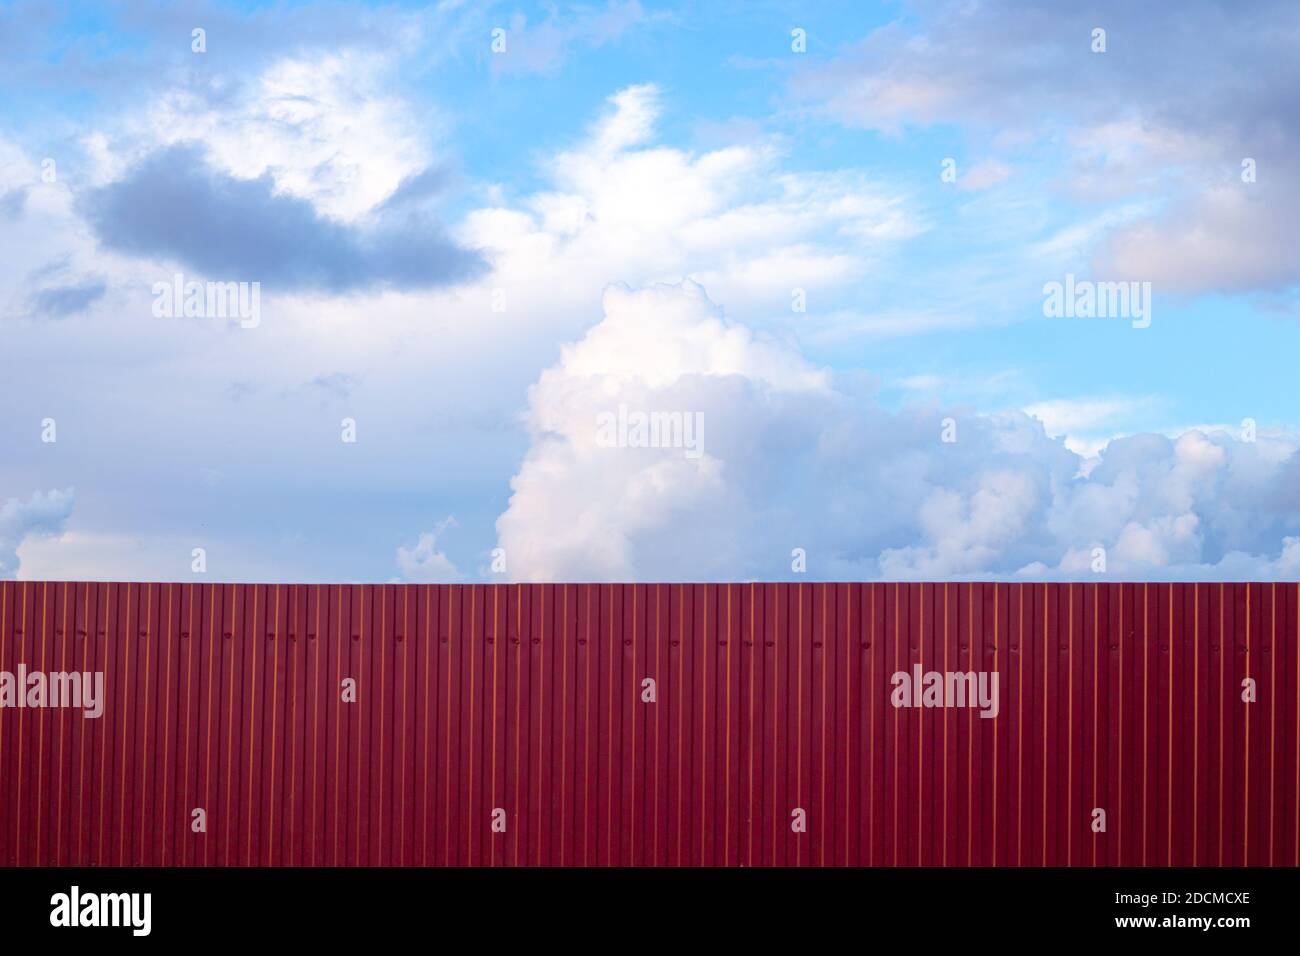 blue sky with clouds behind a burgundy fence, copy space. Freedom concept, border closure. Stock Photo